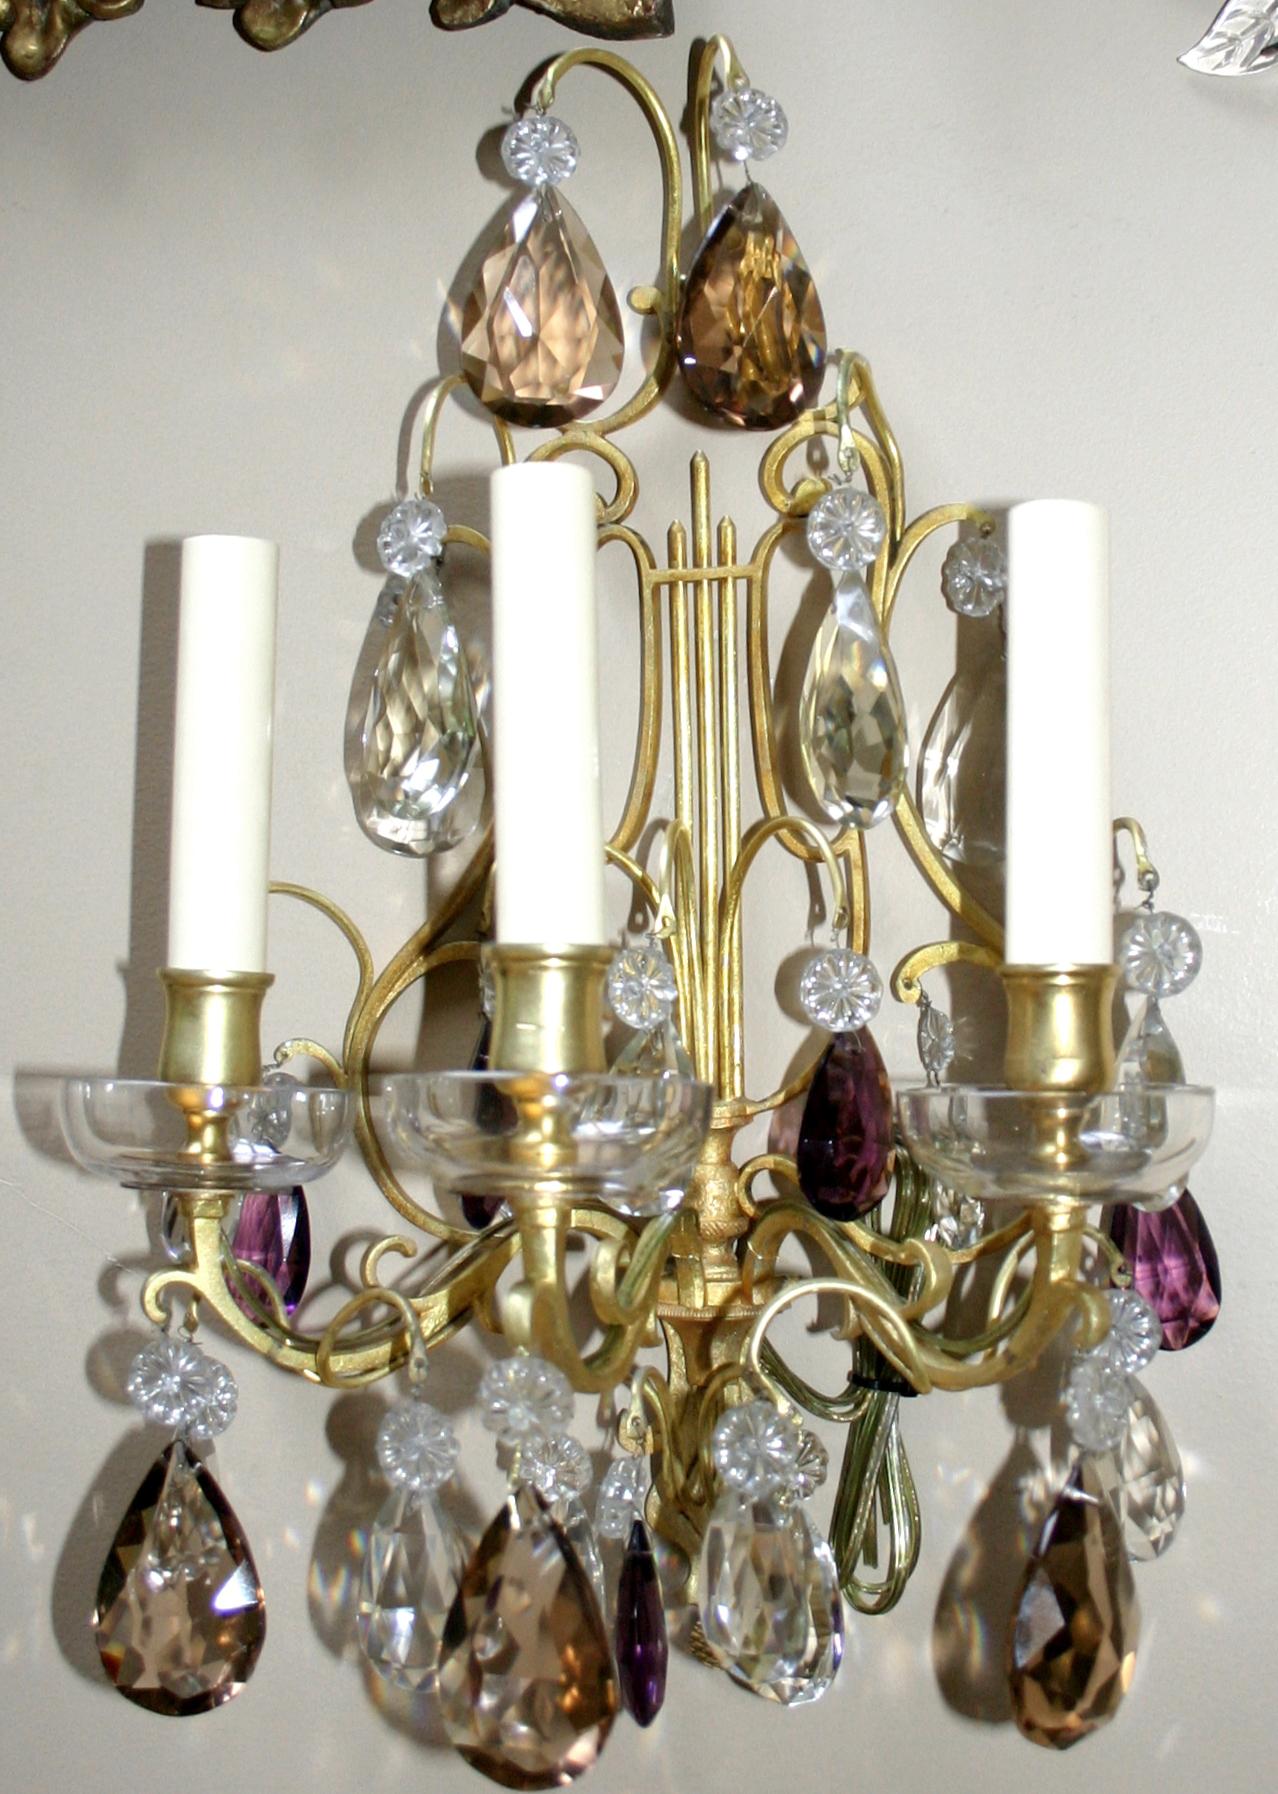 Pair of circa 1920's French three-light gilt bronze and crystal sconces.

Measurements:
Height: 16.5